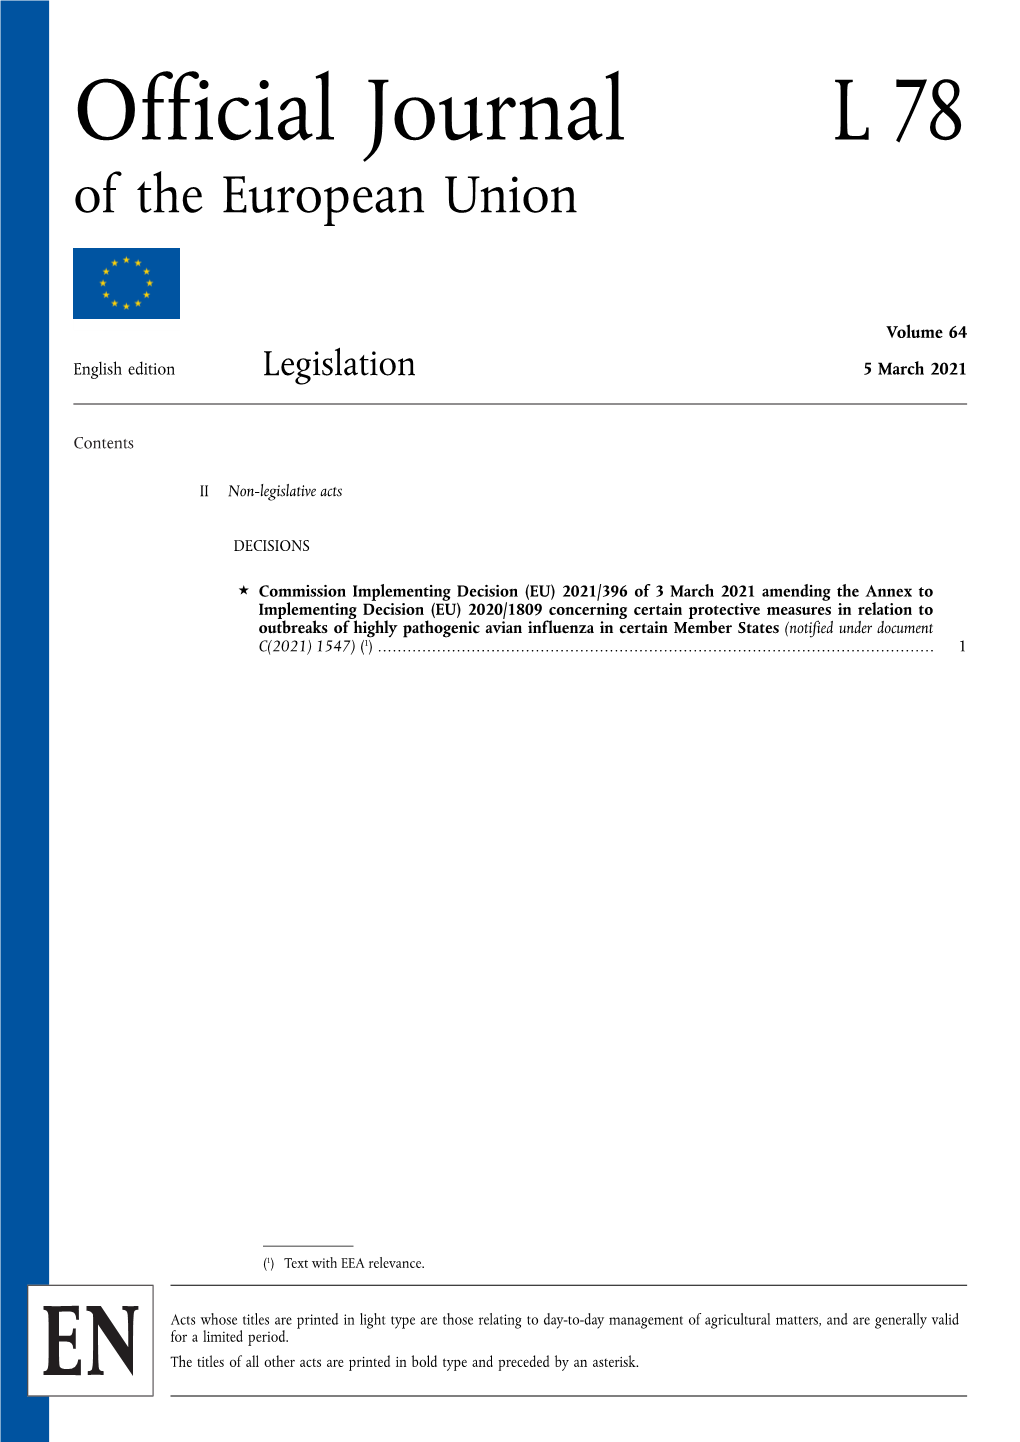 Official Journal L 78 of the European Union